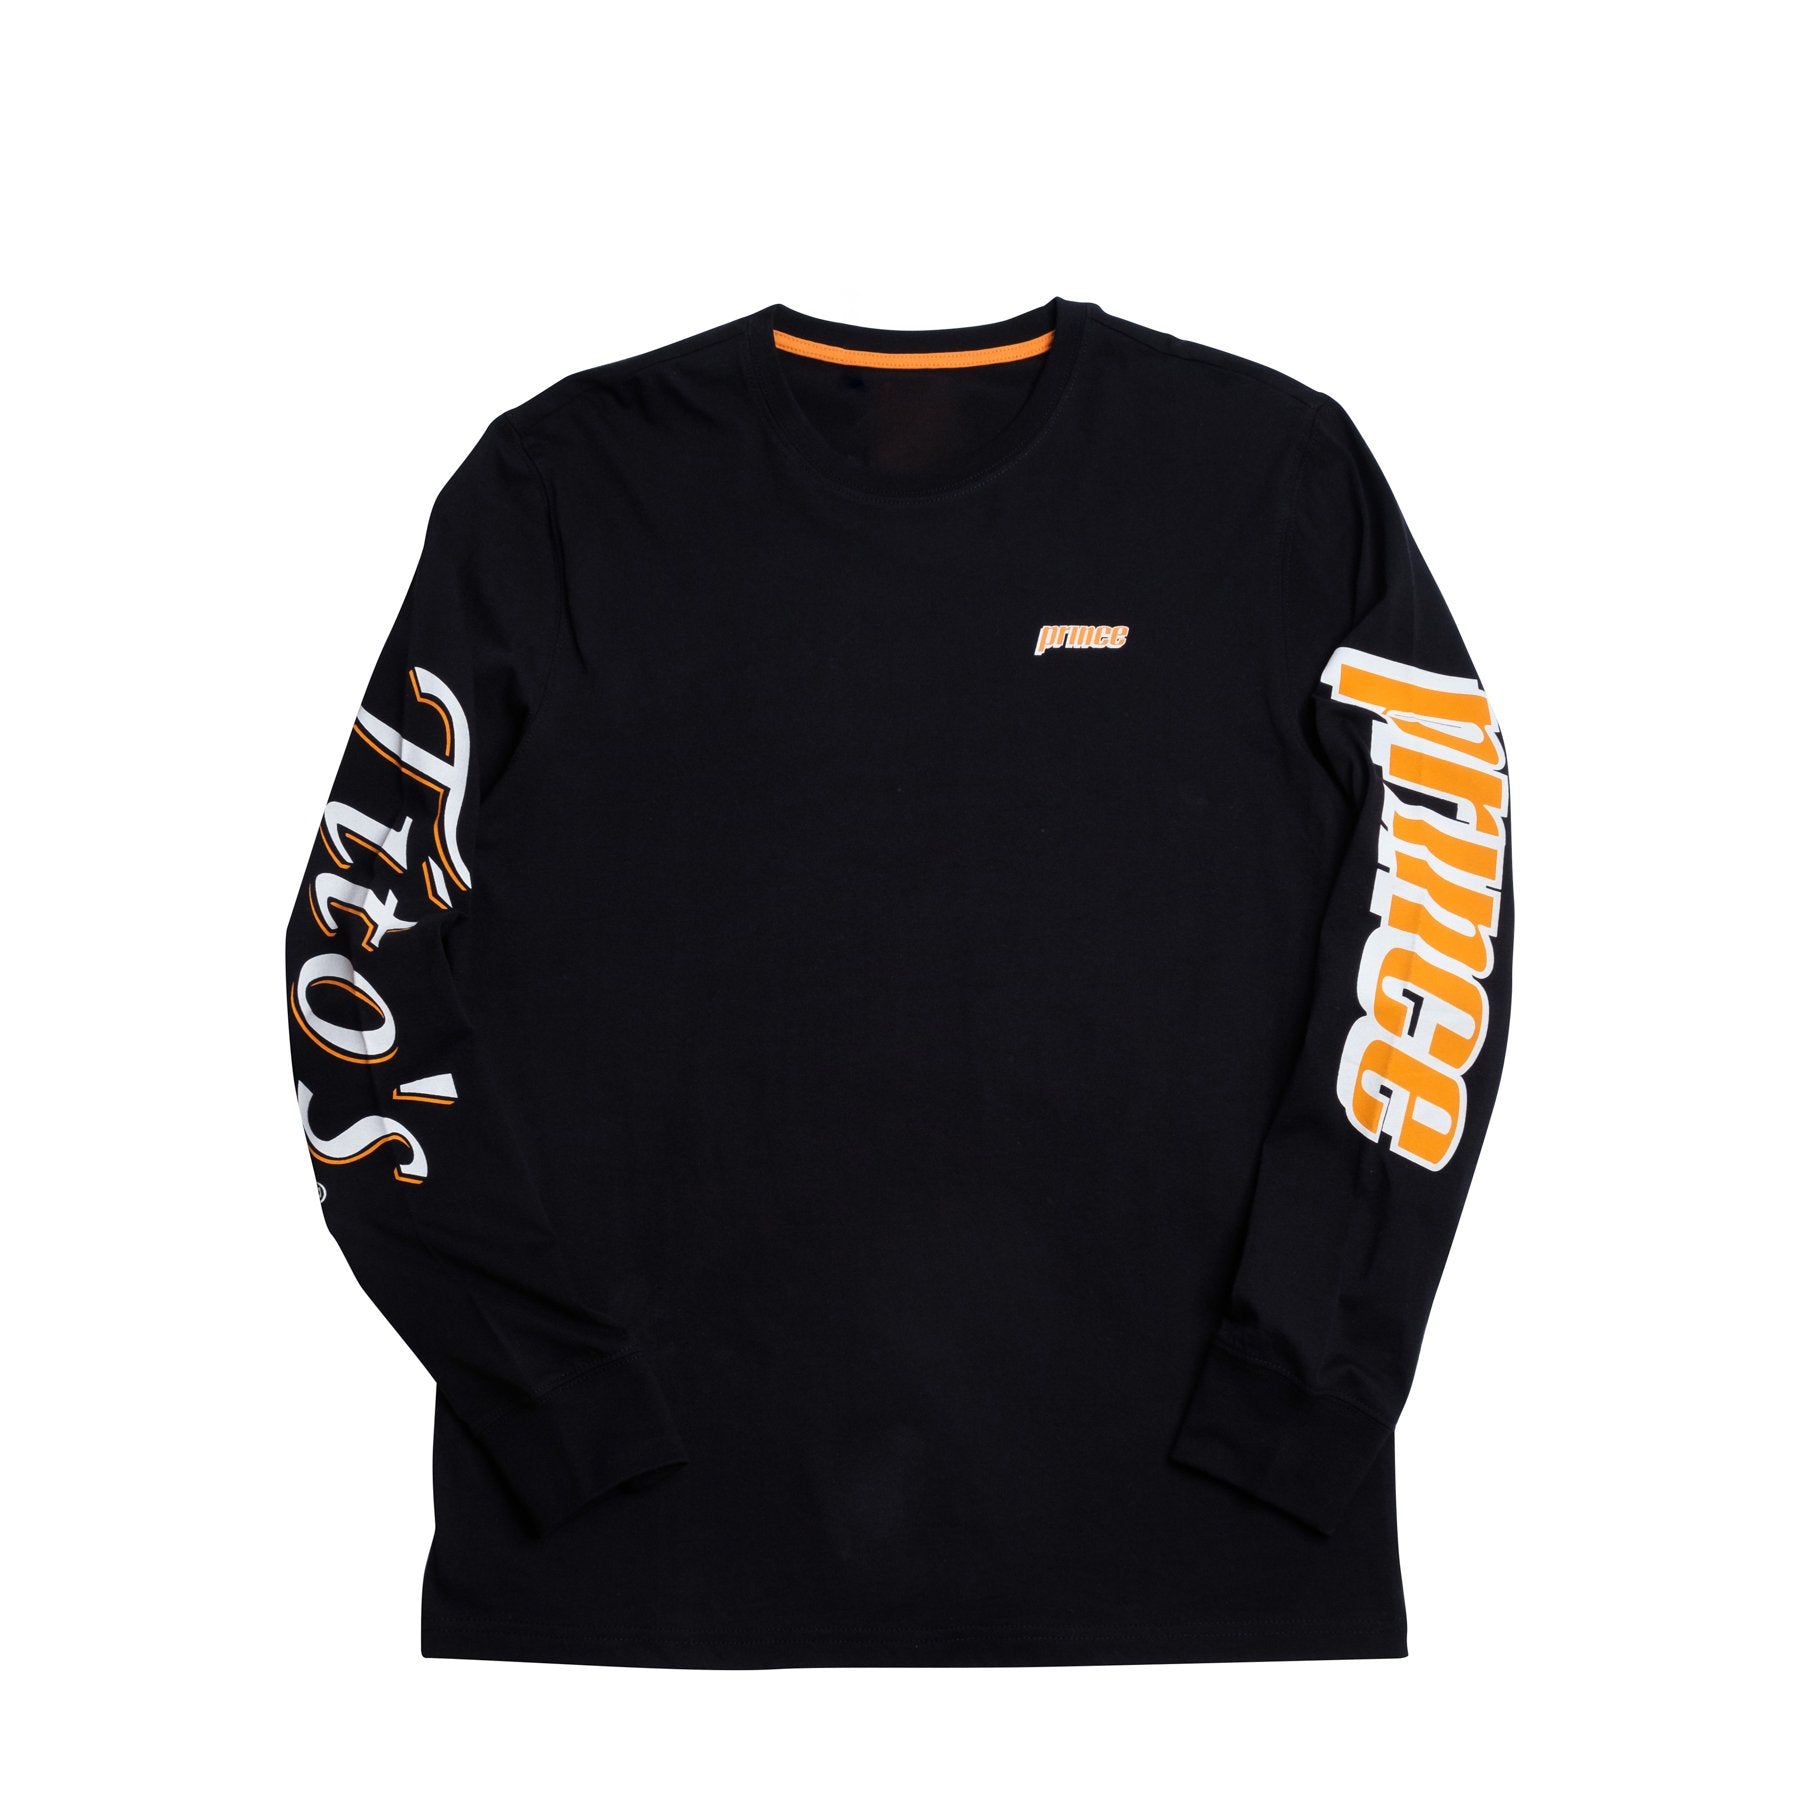 Front of black long sleeve with prince logo on left chest in orange, prince logo on left sleeve, and tito's logo on right sleeve